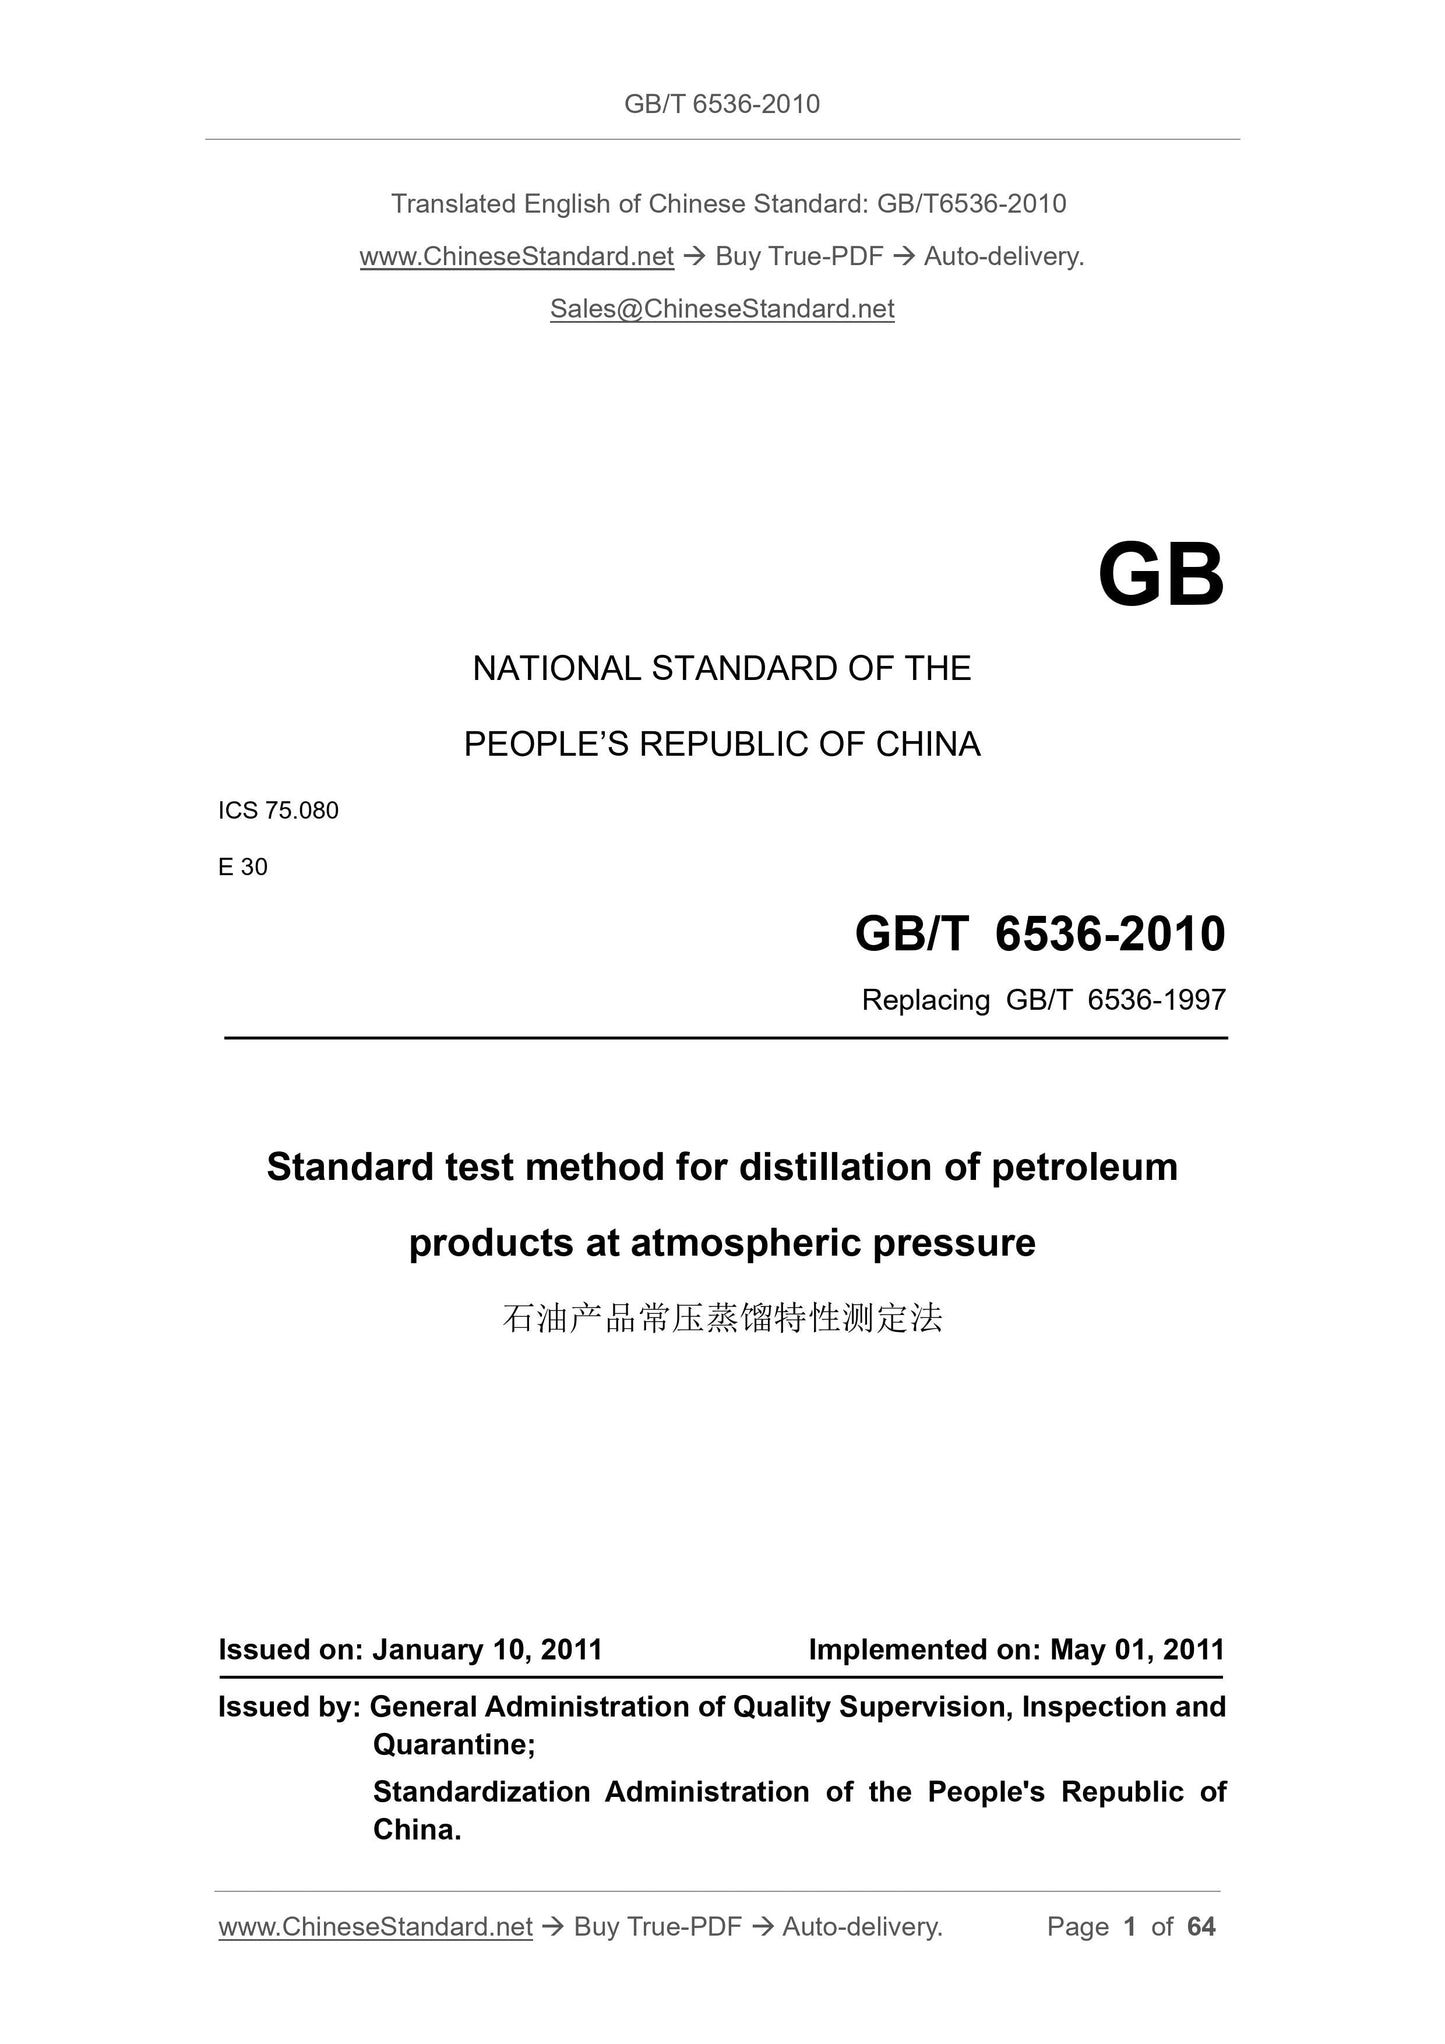 GB/T 6536-2010 Page 1